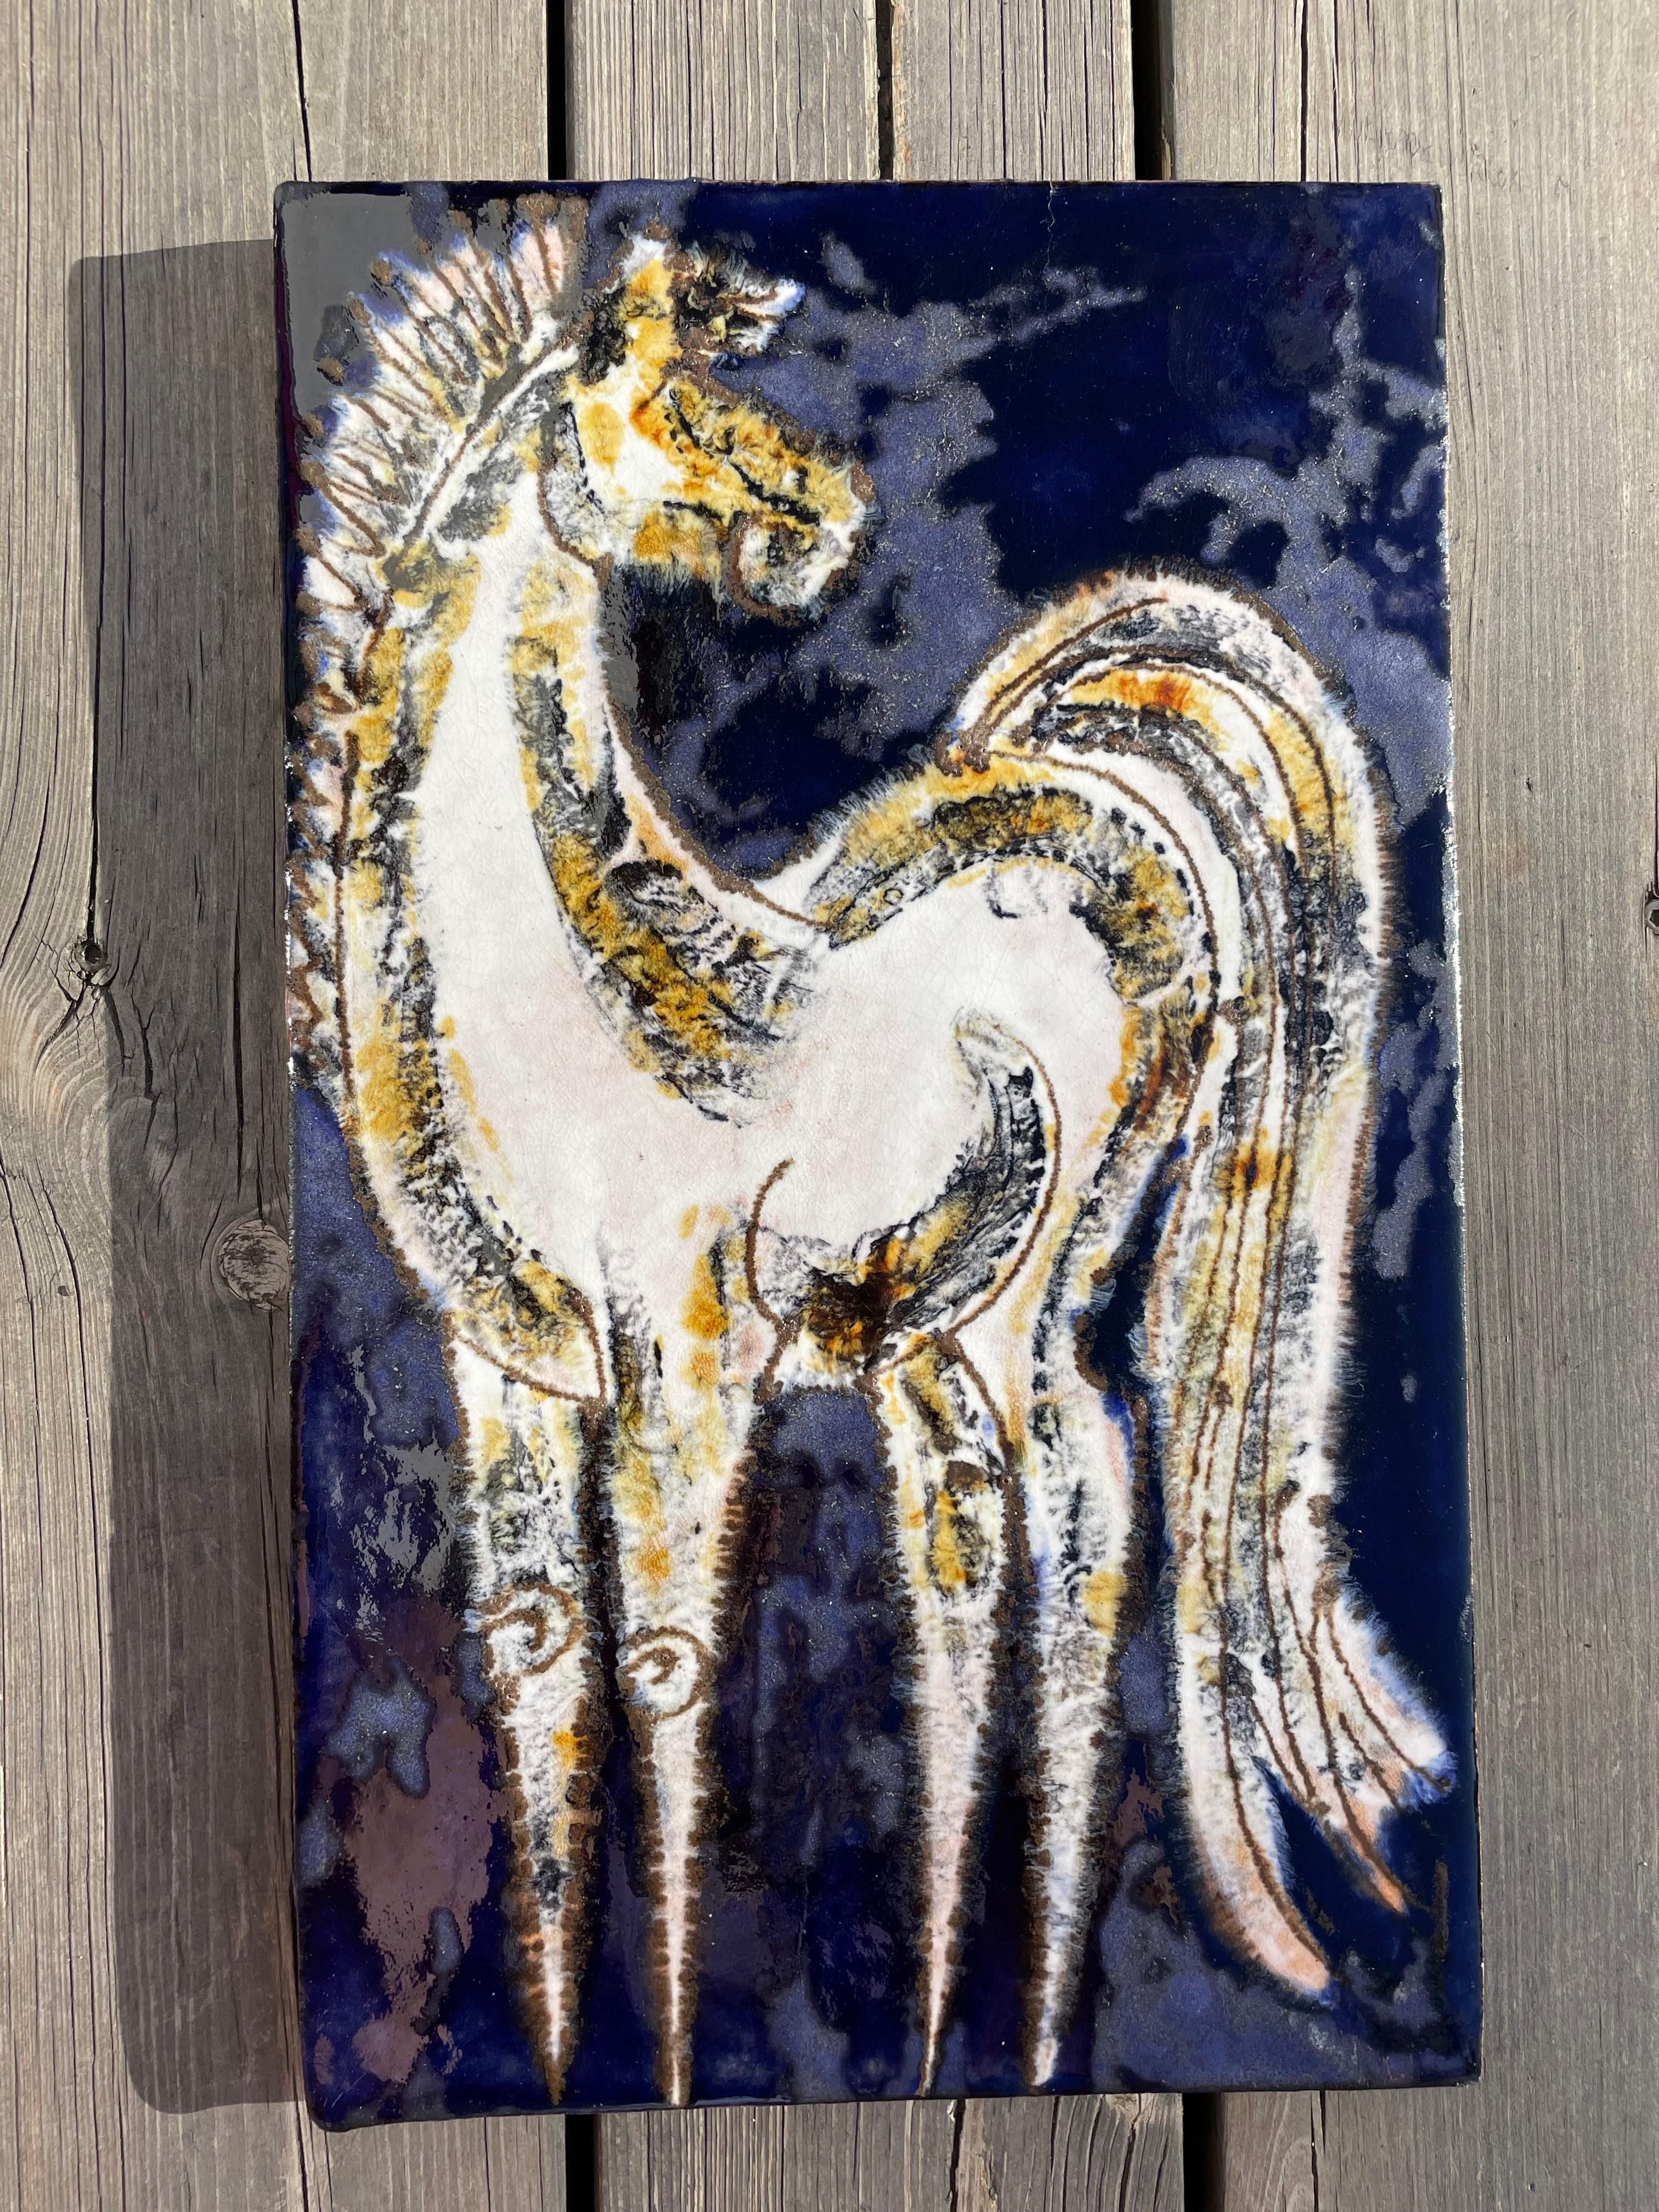 Handmade midcentury modern rectangular ceramic wall plaque with expressive white horse motif. Matte and shiny glaze in blue, white, yellow and light gray colors. Metal mount for wall hanging on back. Manufactured by Ruscha in the 1960s. Signed and